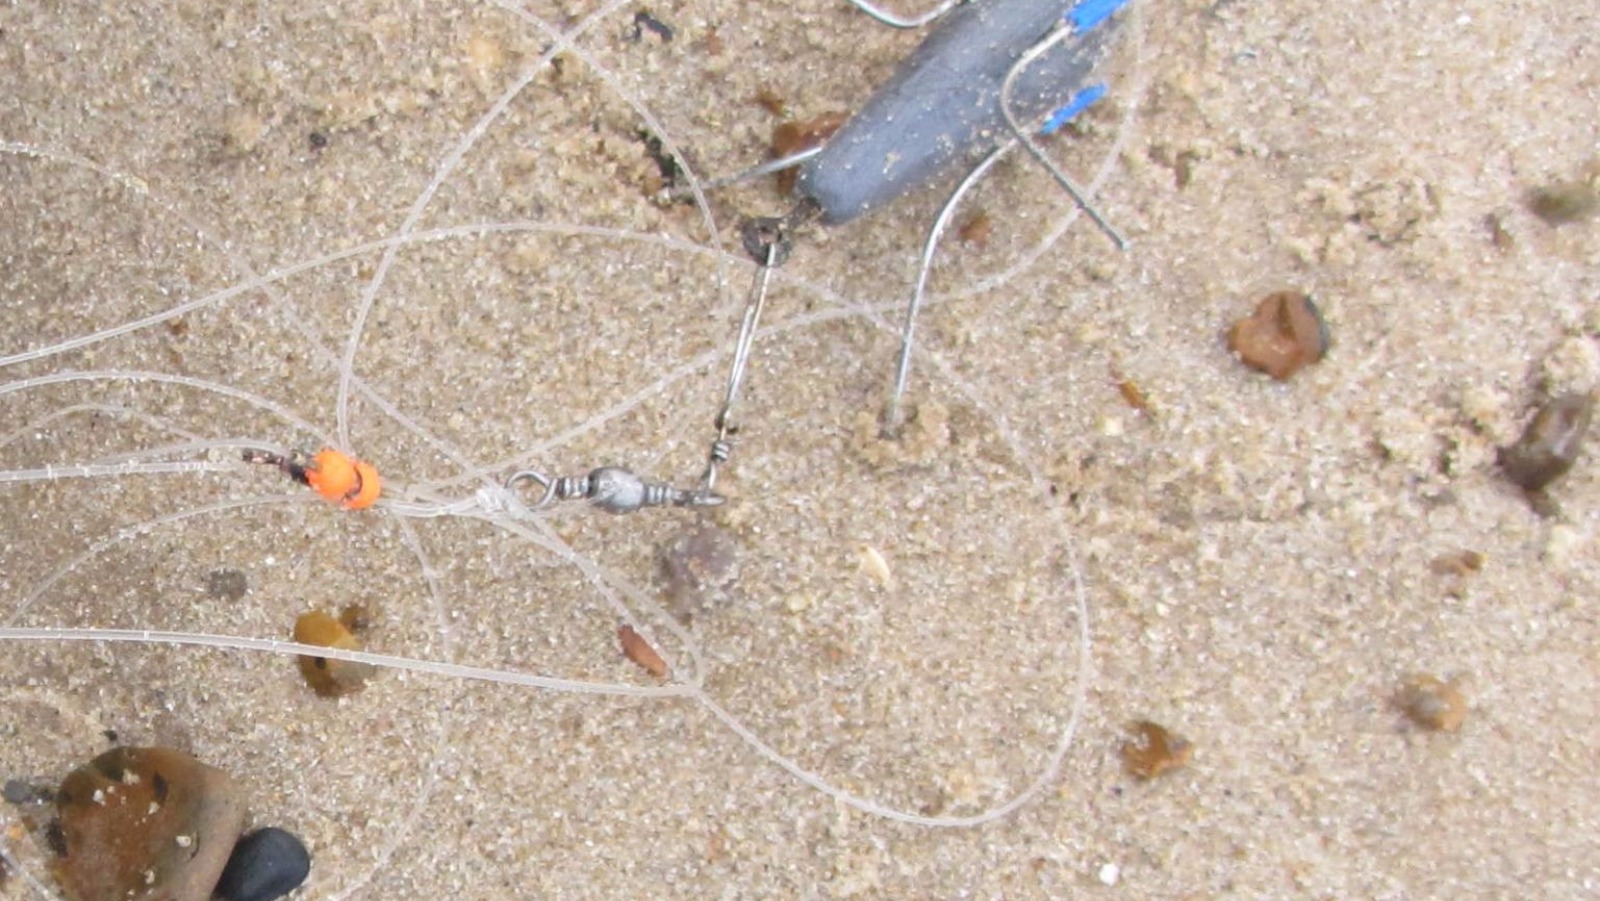 Campaign launched to clean up fishing litter from East Anglia's